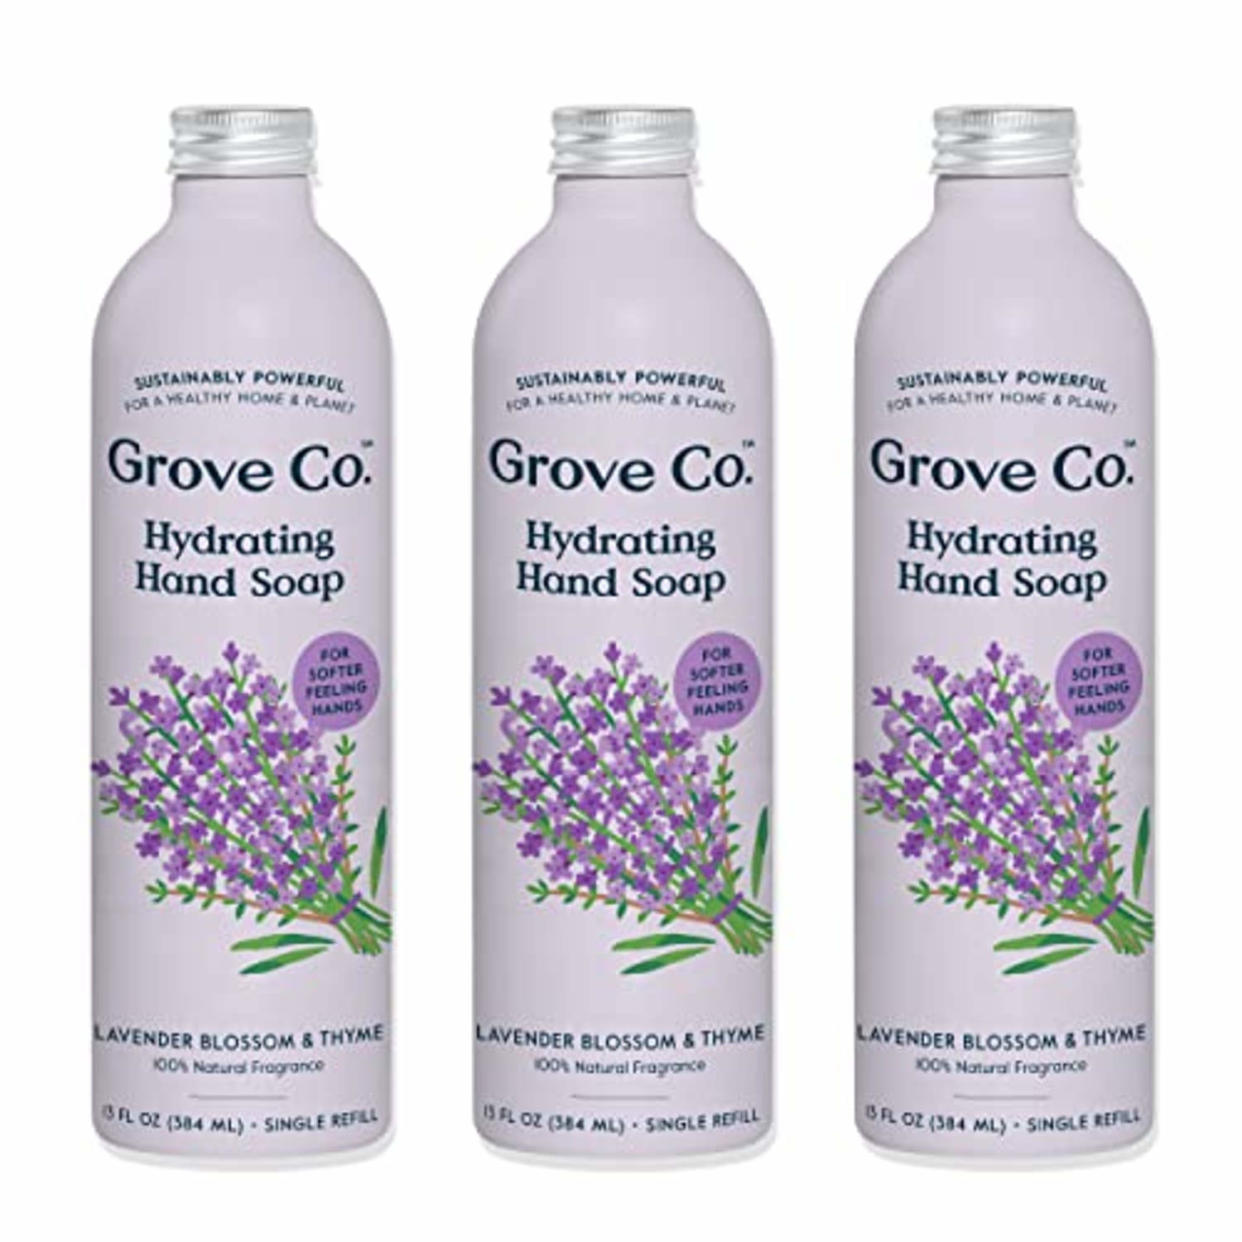 Grove Co. Hydrating Gel Hand Soap Refills (3 x 13 Fl Oz) Plastic-Free Liquid Hands Cleaner Refill Set, Leaves Hands Soft and Clean, 100% Natural Lavender Blossom & Thyme Fragrance (AMAZON)